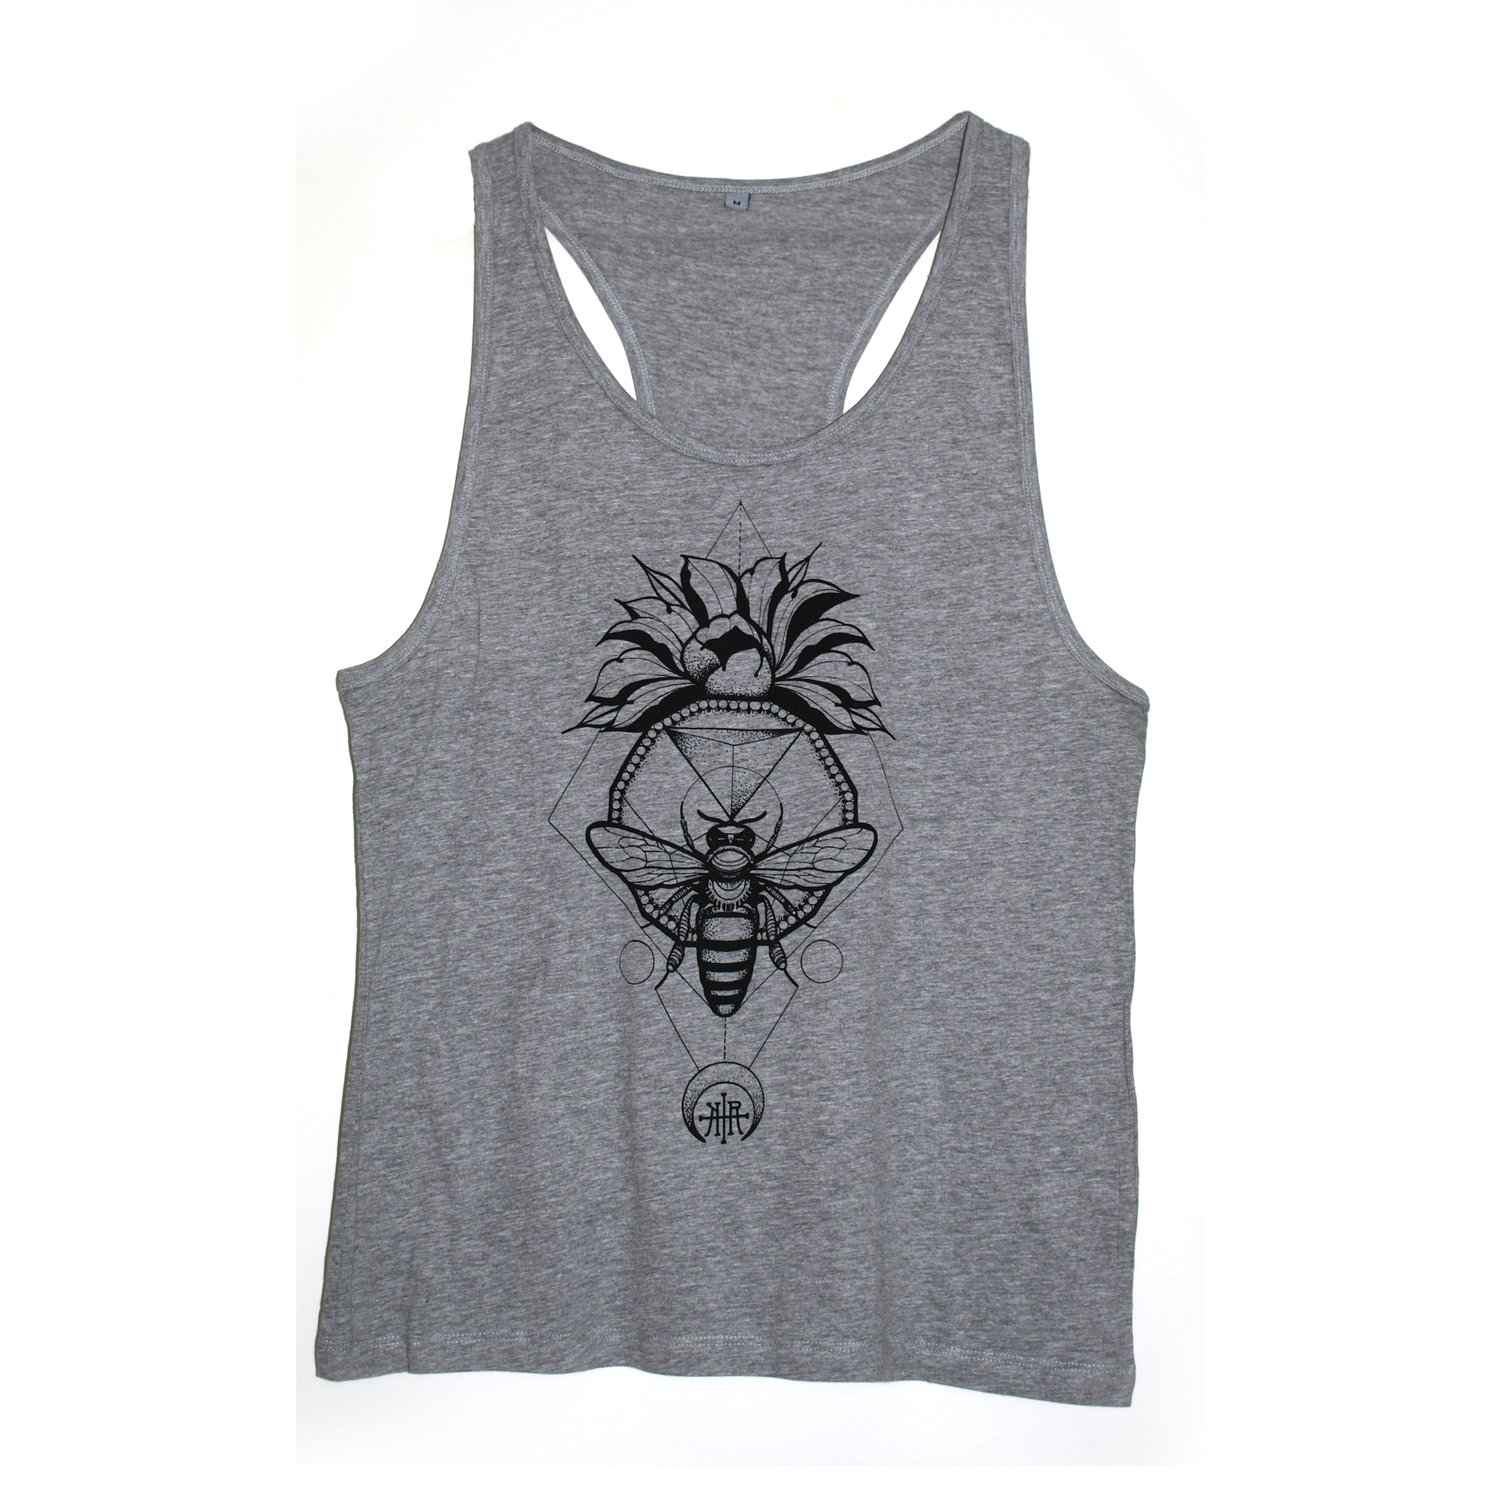 Image of "Save the Bees" Tank Top Grey